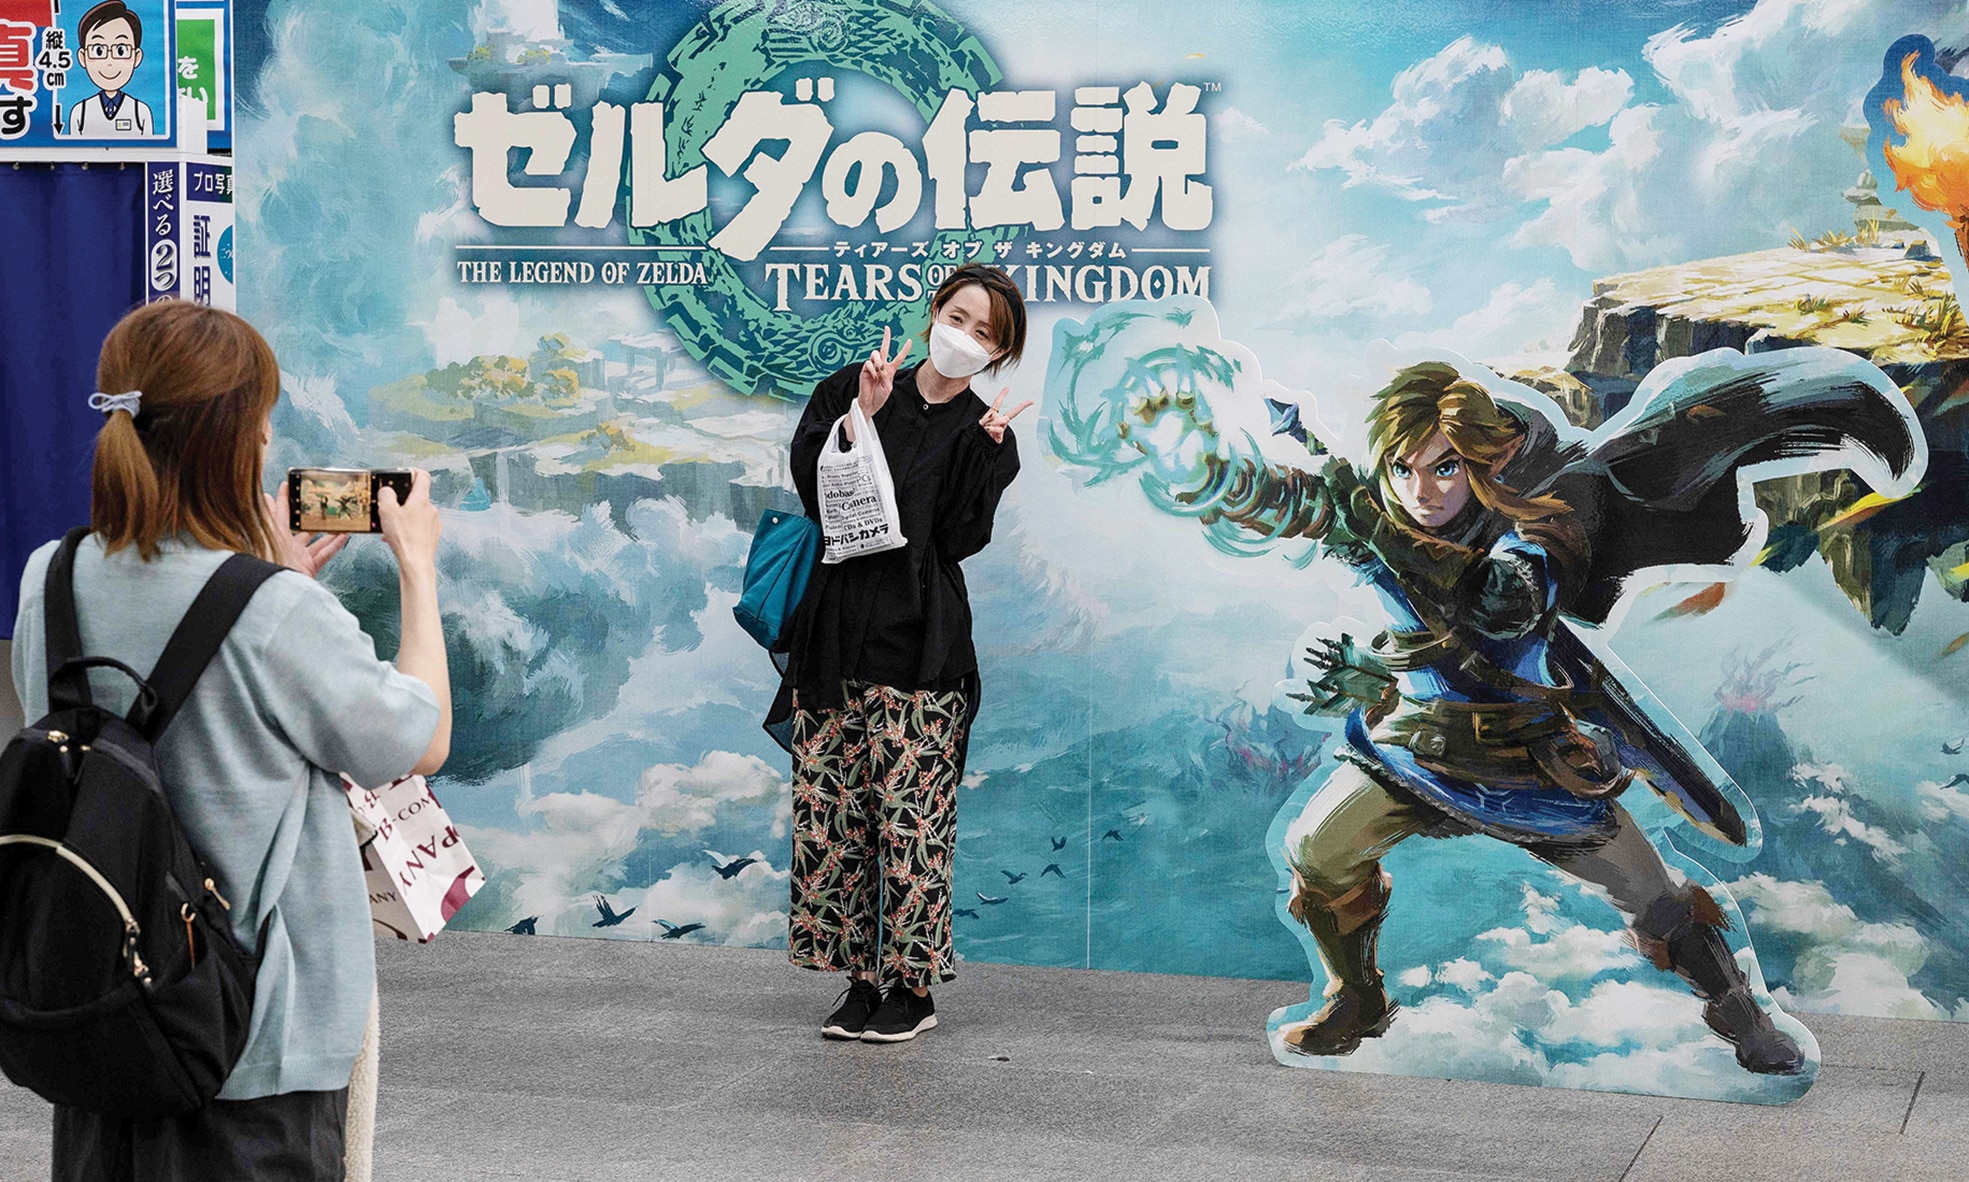 A woman poses for a photo at a display outside a popular electronics chain store advertising the latest offering from Japanese gaming giant Nintendo's long-running 'Legend of Zelda' game series - 'Tears of the Kingdom' .